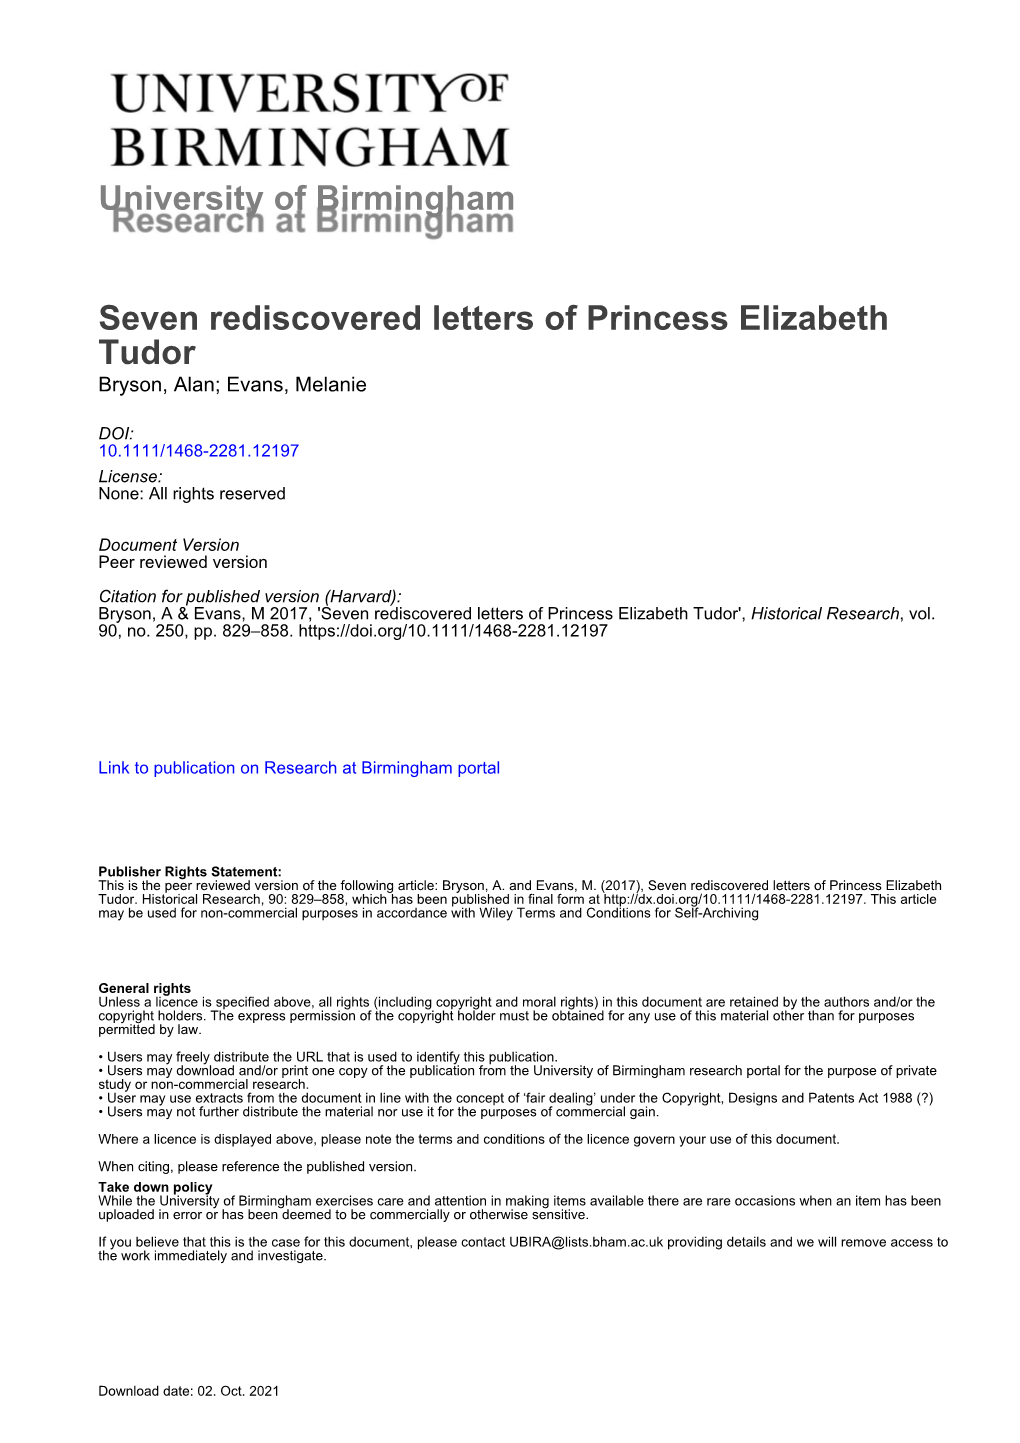 Seven Newly-Discovered Letters of Princess Elizabeth*